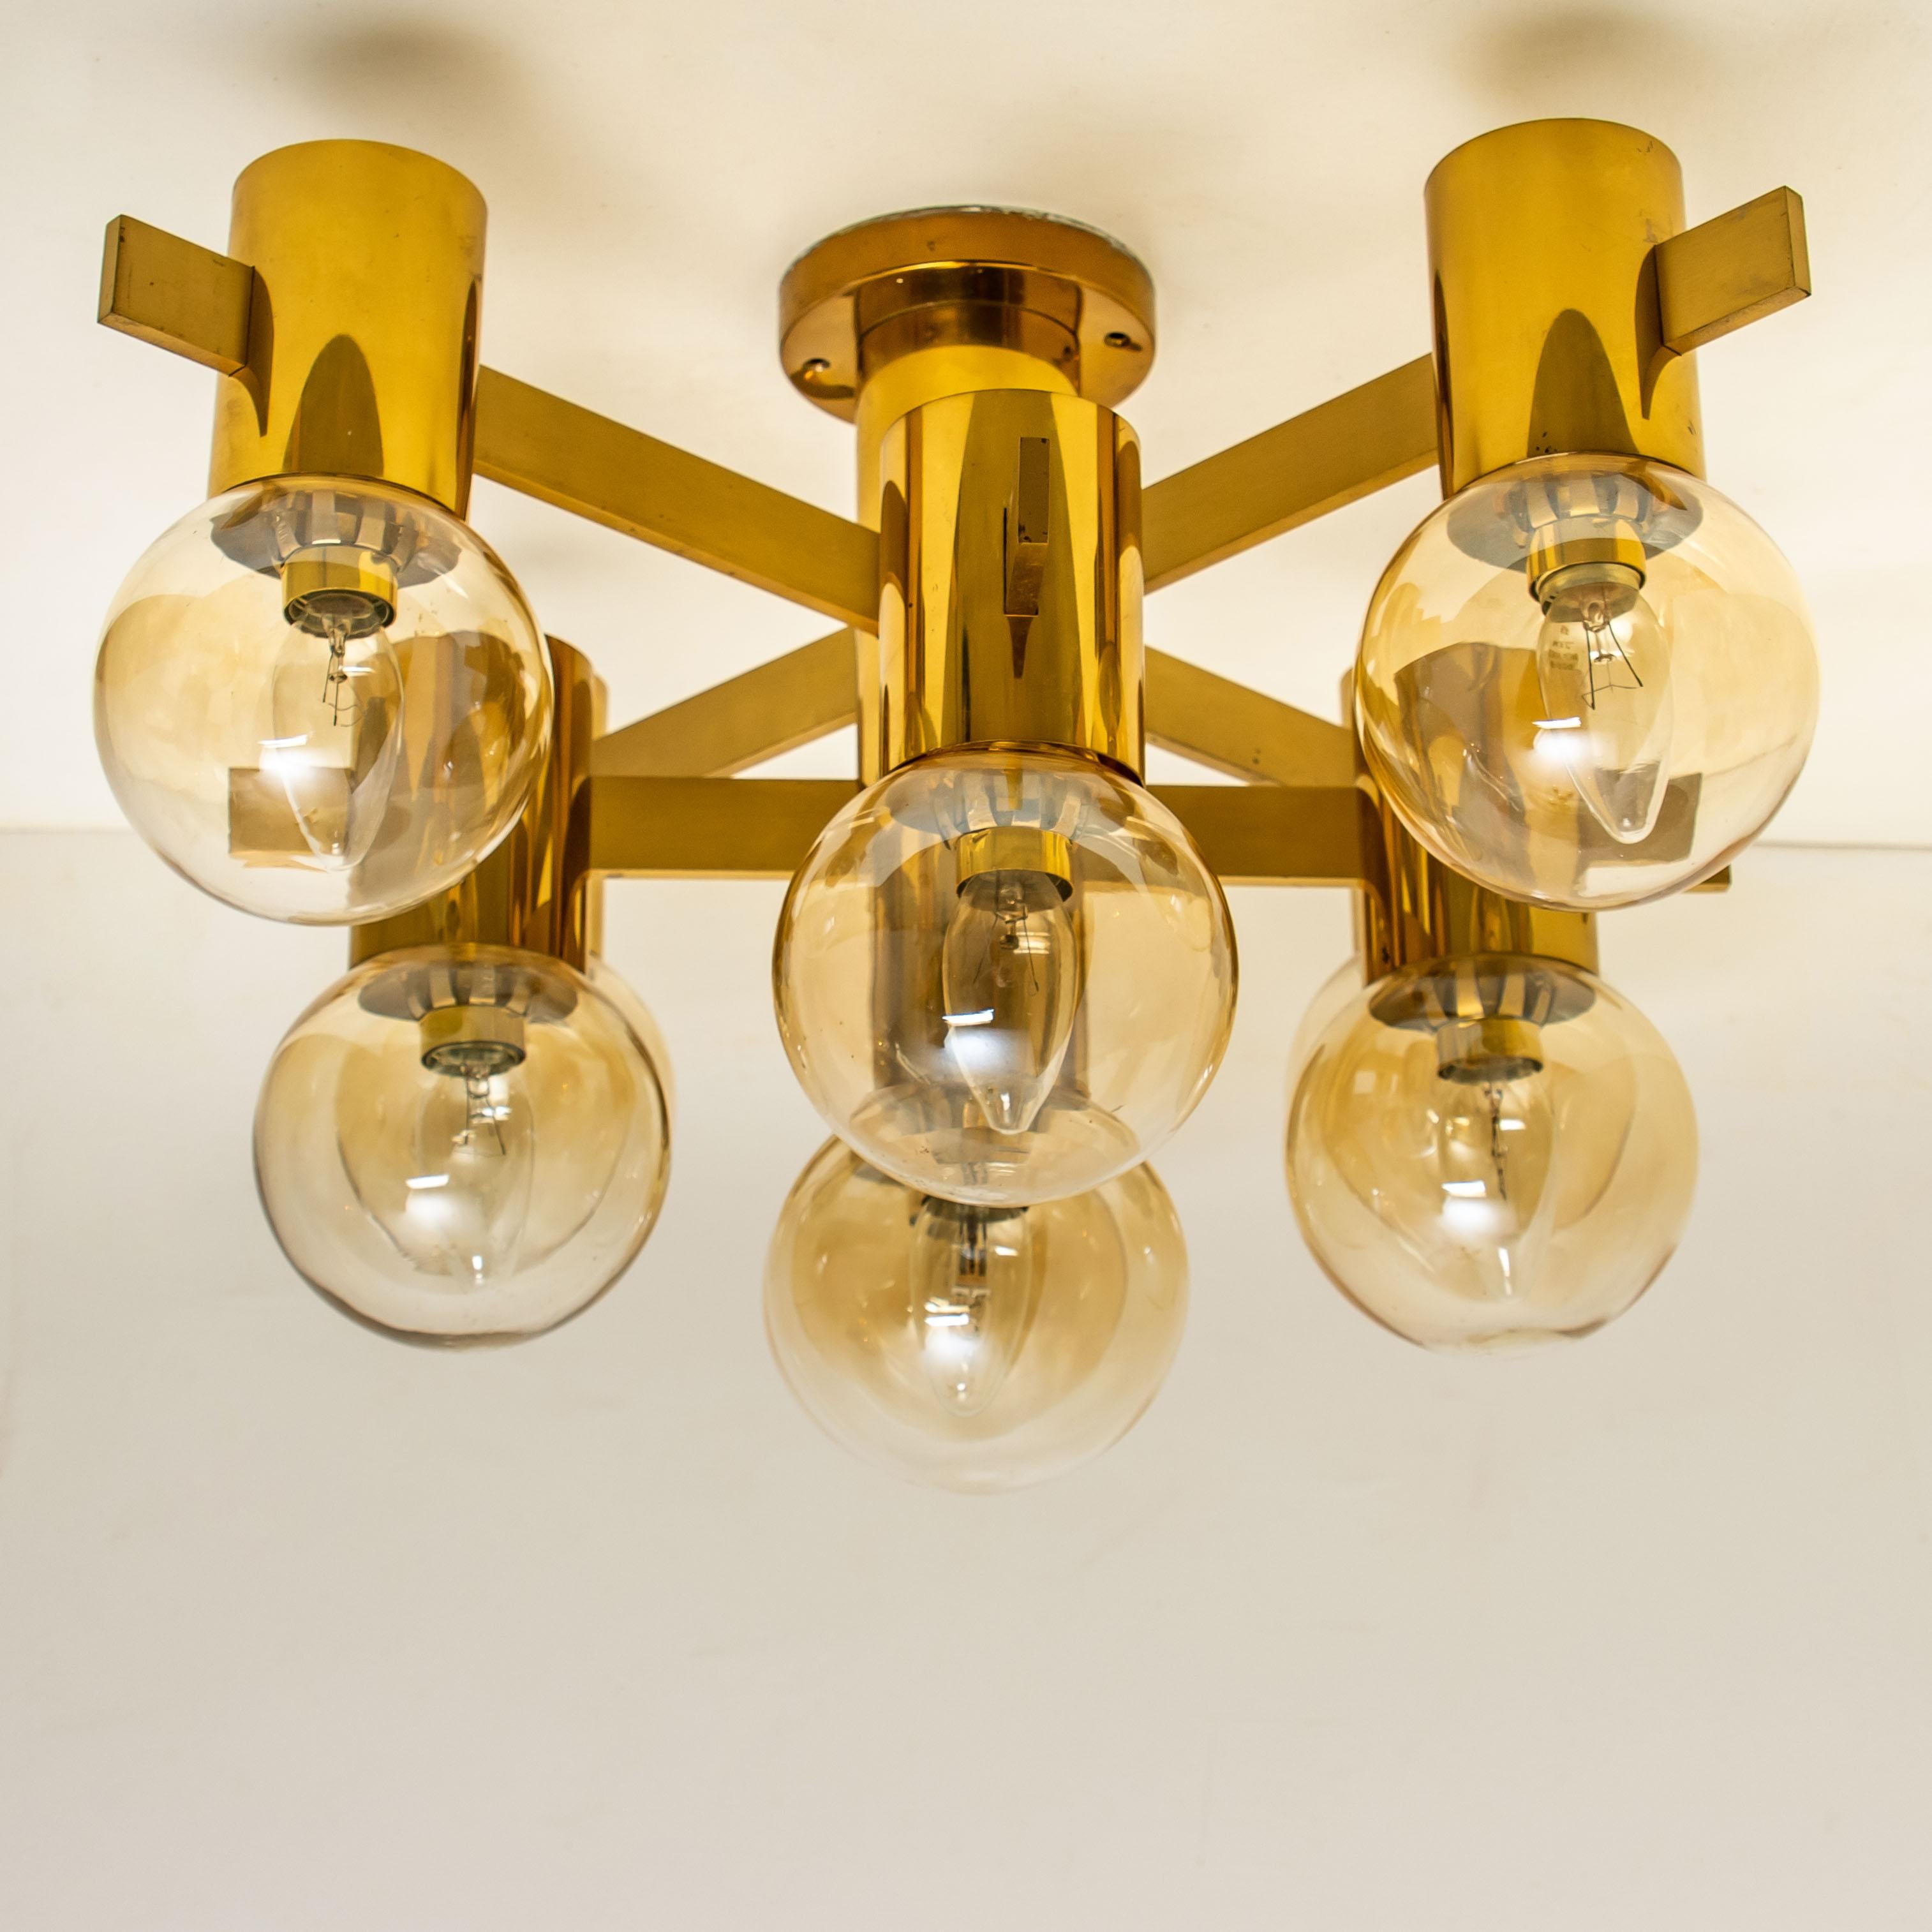 Mid-20th Century Large Brass and Glass Light Fixture in the Style of Jacobsson, 1960s For Sale